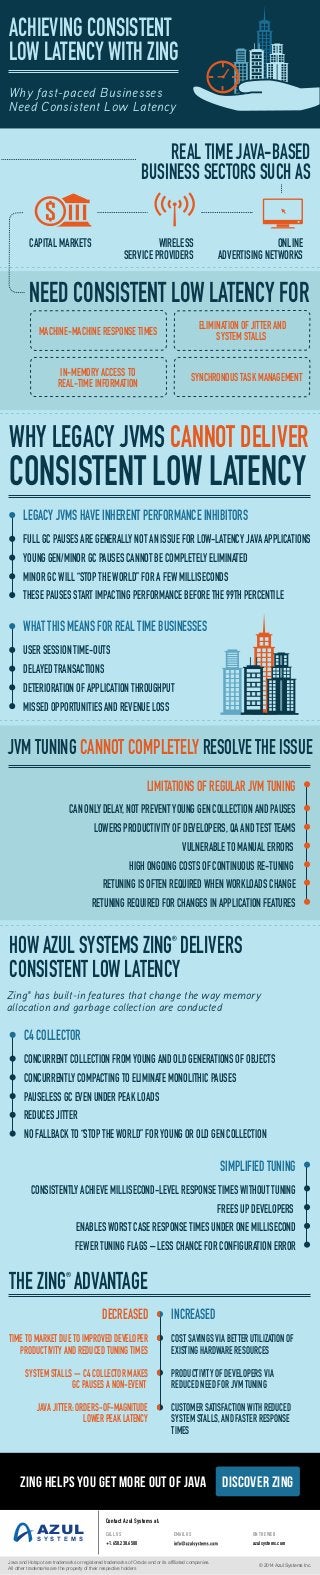 MACHINE-MACHINE RESPONSE TIMES
ELIMINATION OF JITTER AND
SYSTEM STALLS
SYNCHRONOUS TASK MANAGEMENT
IN-MEMORY ACCESS TO
REAL-TIME INFORMATION
ACHIEVING CONSISTENT
LOW LATENCY WITH ZING
REAL TIME JAVA-BASED
BUSINESS SECTORS SUCH AS
CAPITAL MARKETS WIRELESS
SERVICE PROVIDERS
ONLINE
ADVERTISING NETWORKS
NEED CONSISTENT LOW LATENCY FOR
WHY LEGACY JVMS CANNOT DELIVER
CONSISTENT LOW LATENCY
JVM TUNING CANNOT COMPLETELY RESOLVE THE ISSUE
HOW AZUL SYSTEMS ZING DELIVERS
CONSISTENT LOW LATENCY
THE ZING ADVANTAGE
Zing has built-in features that change the way memory
allocation and garbage collection are conducted
LEGACY JVMS HAVE INHERENT PERFORMANCE INHIBITORS
FULL GC PAUSES ARE GENERALLY NOT AN ISSUE FOR LOW-LATENCY JAVA APPLICATIONS
YOUNG GEN/MINOR GC PAUSES CANNOT BE COMPLETELY ELIMINATED
MINOR GC WILL “STOP THE WORLD” FOR A FEW MILLISECONDS
THESE PAUSES START IMPACTING PERFORMANCE BEFORE THE 99TH PERCENTILE
Why fast-paced Businesses
Need Consistent Low Latency
INCREASED
COST SAVINGS VIA BETTER UTILIZATION OF
EXISTING HARDWARE RESOURCES
PRODUCTIVITY OF DEVELOPERS VIA
REDUCED NEED FOR JVM TUNING
CUSTOMER SATISFACTION WITH REDUCED
SYSTEM STALLS, AND FASTER RESPONSE
TIMES
DECREASED
TIME TO MARKET DUE TO IMPROVED DEVELOPER
PRODUCTIVITY AND REDUCED TUNING TIMES
SYSTEM STALLS -- C4 COLLECTOR MAKES
GC PAUSES A NON-EVENT
JAVA JITTER: ORDERS-OF-MAGNITUDE
LOWER PEAK LATENCY
LIMITATIONS OF REGULAR JVM TUNING
CAN ONLY DELAY, NOT PREVENT YOUNG GEN COLLECTION AND PAUSES
LOWERS PRODUCTIVITY OF DEVELOPERS, QA AND TEST TEAMS
VULNERABLE TO MANUAL ERRORS
HIGH ONGOING COSTS OF CONTINUOUS RE-TUNING
RETUNING IS OFTEN REQUIRED WHEN WORKLOADS CHANGE
RETUNING REQUIRED FOR CHANGES IN APPLICATION FEATURES
SIMPLIFIED TUNING
CONSISTENTLY ACHIEVE MILLISECOND-LEVEL RESPONSE TIMES WITHOUT TUNING
FREES UP DEVELOPERS
ENABLES WORST CASE RESPONSE TIMES UNDER ONE MILLISECOND
FEWER TUNING FLAGS – LESS CHANCE FOR CONFIGURATION ERROR
WHAT THIS MEANS FOR REAL TIME BUSINESSES
USER SESSION TIME-OUTS
DELAYED TRANSACTIONS
DETERIORATION OF APPLICATION THROUGHPUT
MISSED OPPORTUNITIES AND REVENUE LOSS
C4 COLLECTOR
CONCURRENT COLLECTION FROM YOUNG AND OLD GENERATIONS OF OBJECTS
CONCURRENTLY COMPACTING TO ELIMINATE MONOLITHIC PAUSES
PAUSELESS GC EVEN UNDER PEAK LOADS
REDUCES JITTER
NO FALLBACK TO “STOP THE WORLD” FOR YOUNG OR OLD GEN COLLECTION
ZING HELPS YOU GET MORE OUT OF JAVA DISCOVER ZING
Contact Azul Systems at:
CALL US EMAIL US ON THE WEB
+1.650.230.6500
AZUL
S Y S T E M S
azulsystems.com
Java and Hotspot are trademarks or registered trademarks of Oracle and or its affiliated companies.
All other trademarks are the property of their respective holders
© 2014 Azul Systems Inc.
 